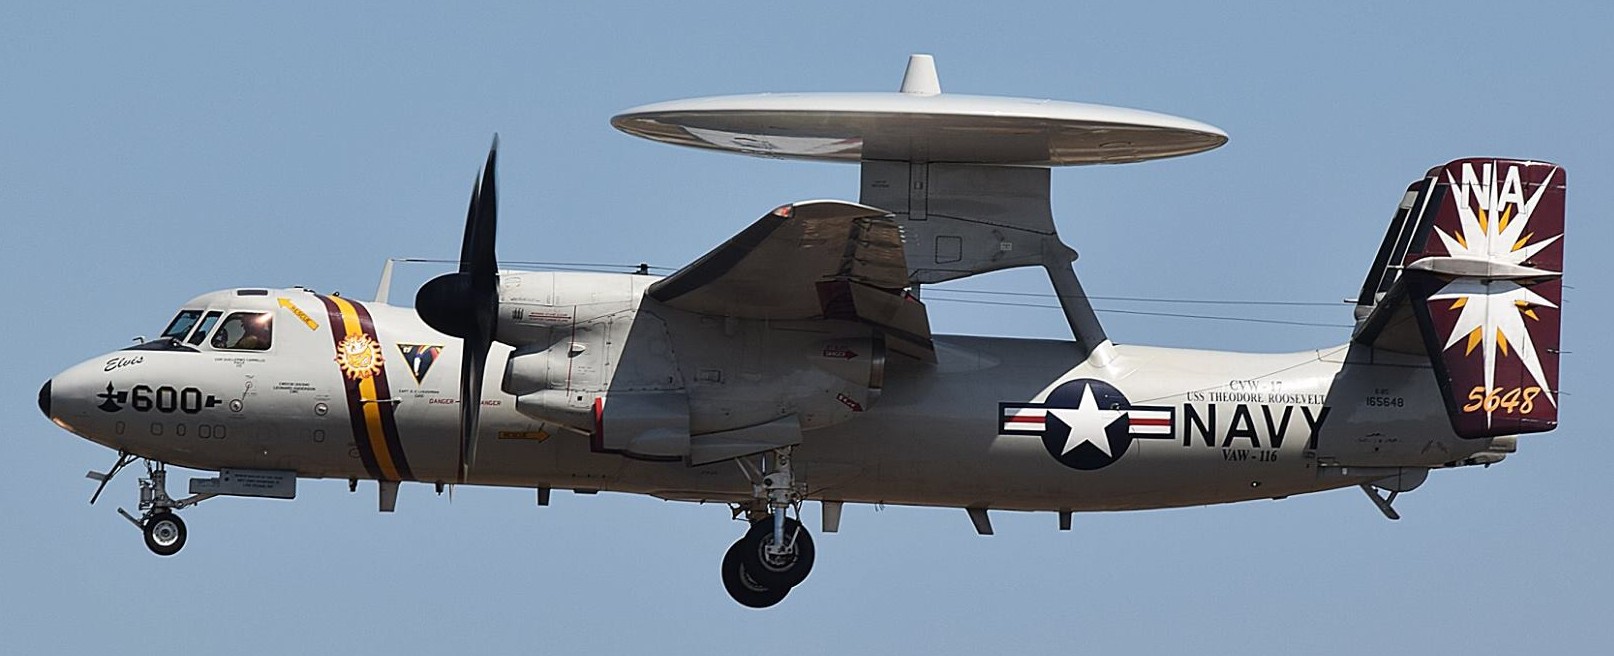 vaw-116 sun kings airborne command control squadron carrier early warning cvw-17 naval base ventura county point mugu 81